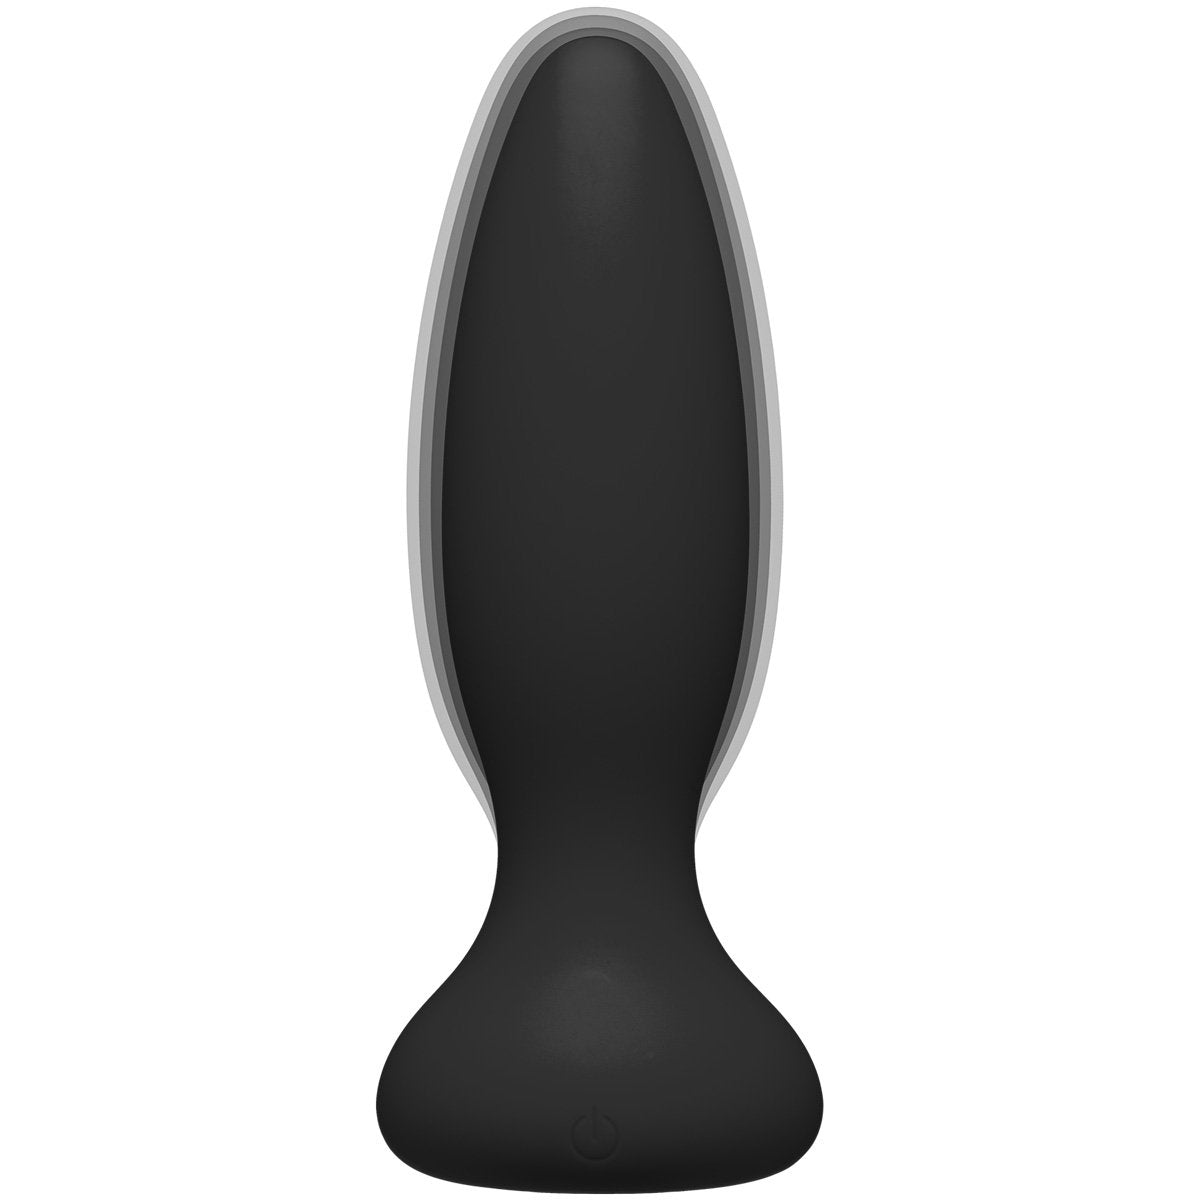 Doc Johnson A Play Adventurous VIBE – Silicone Vibrating Butt Plug with Remote – Black